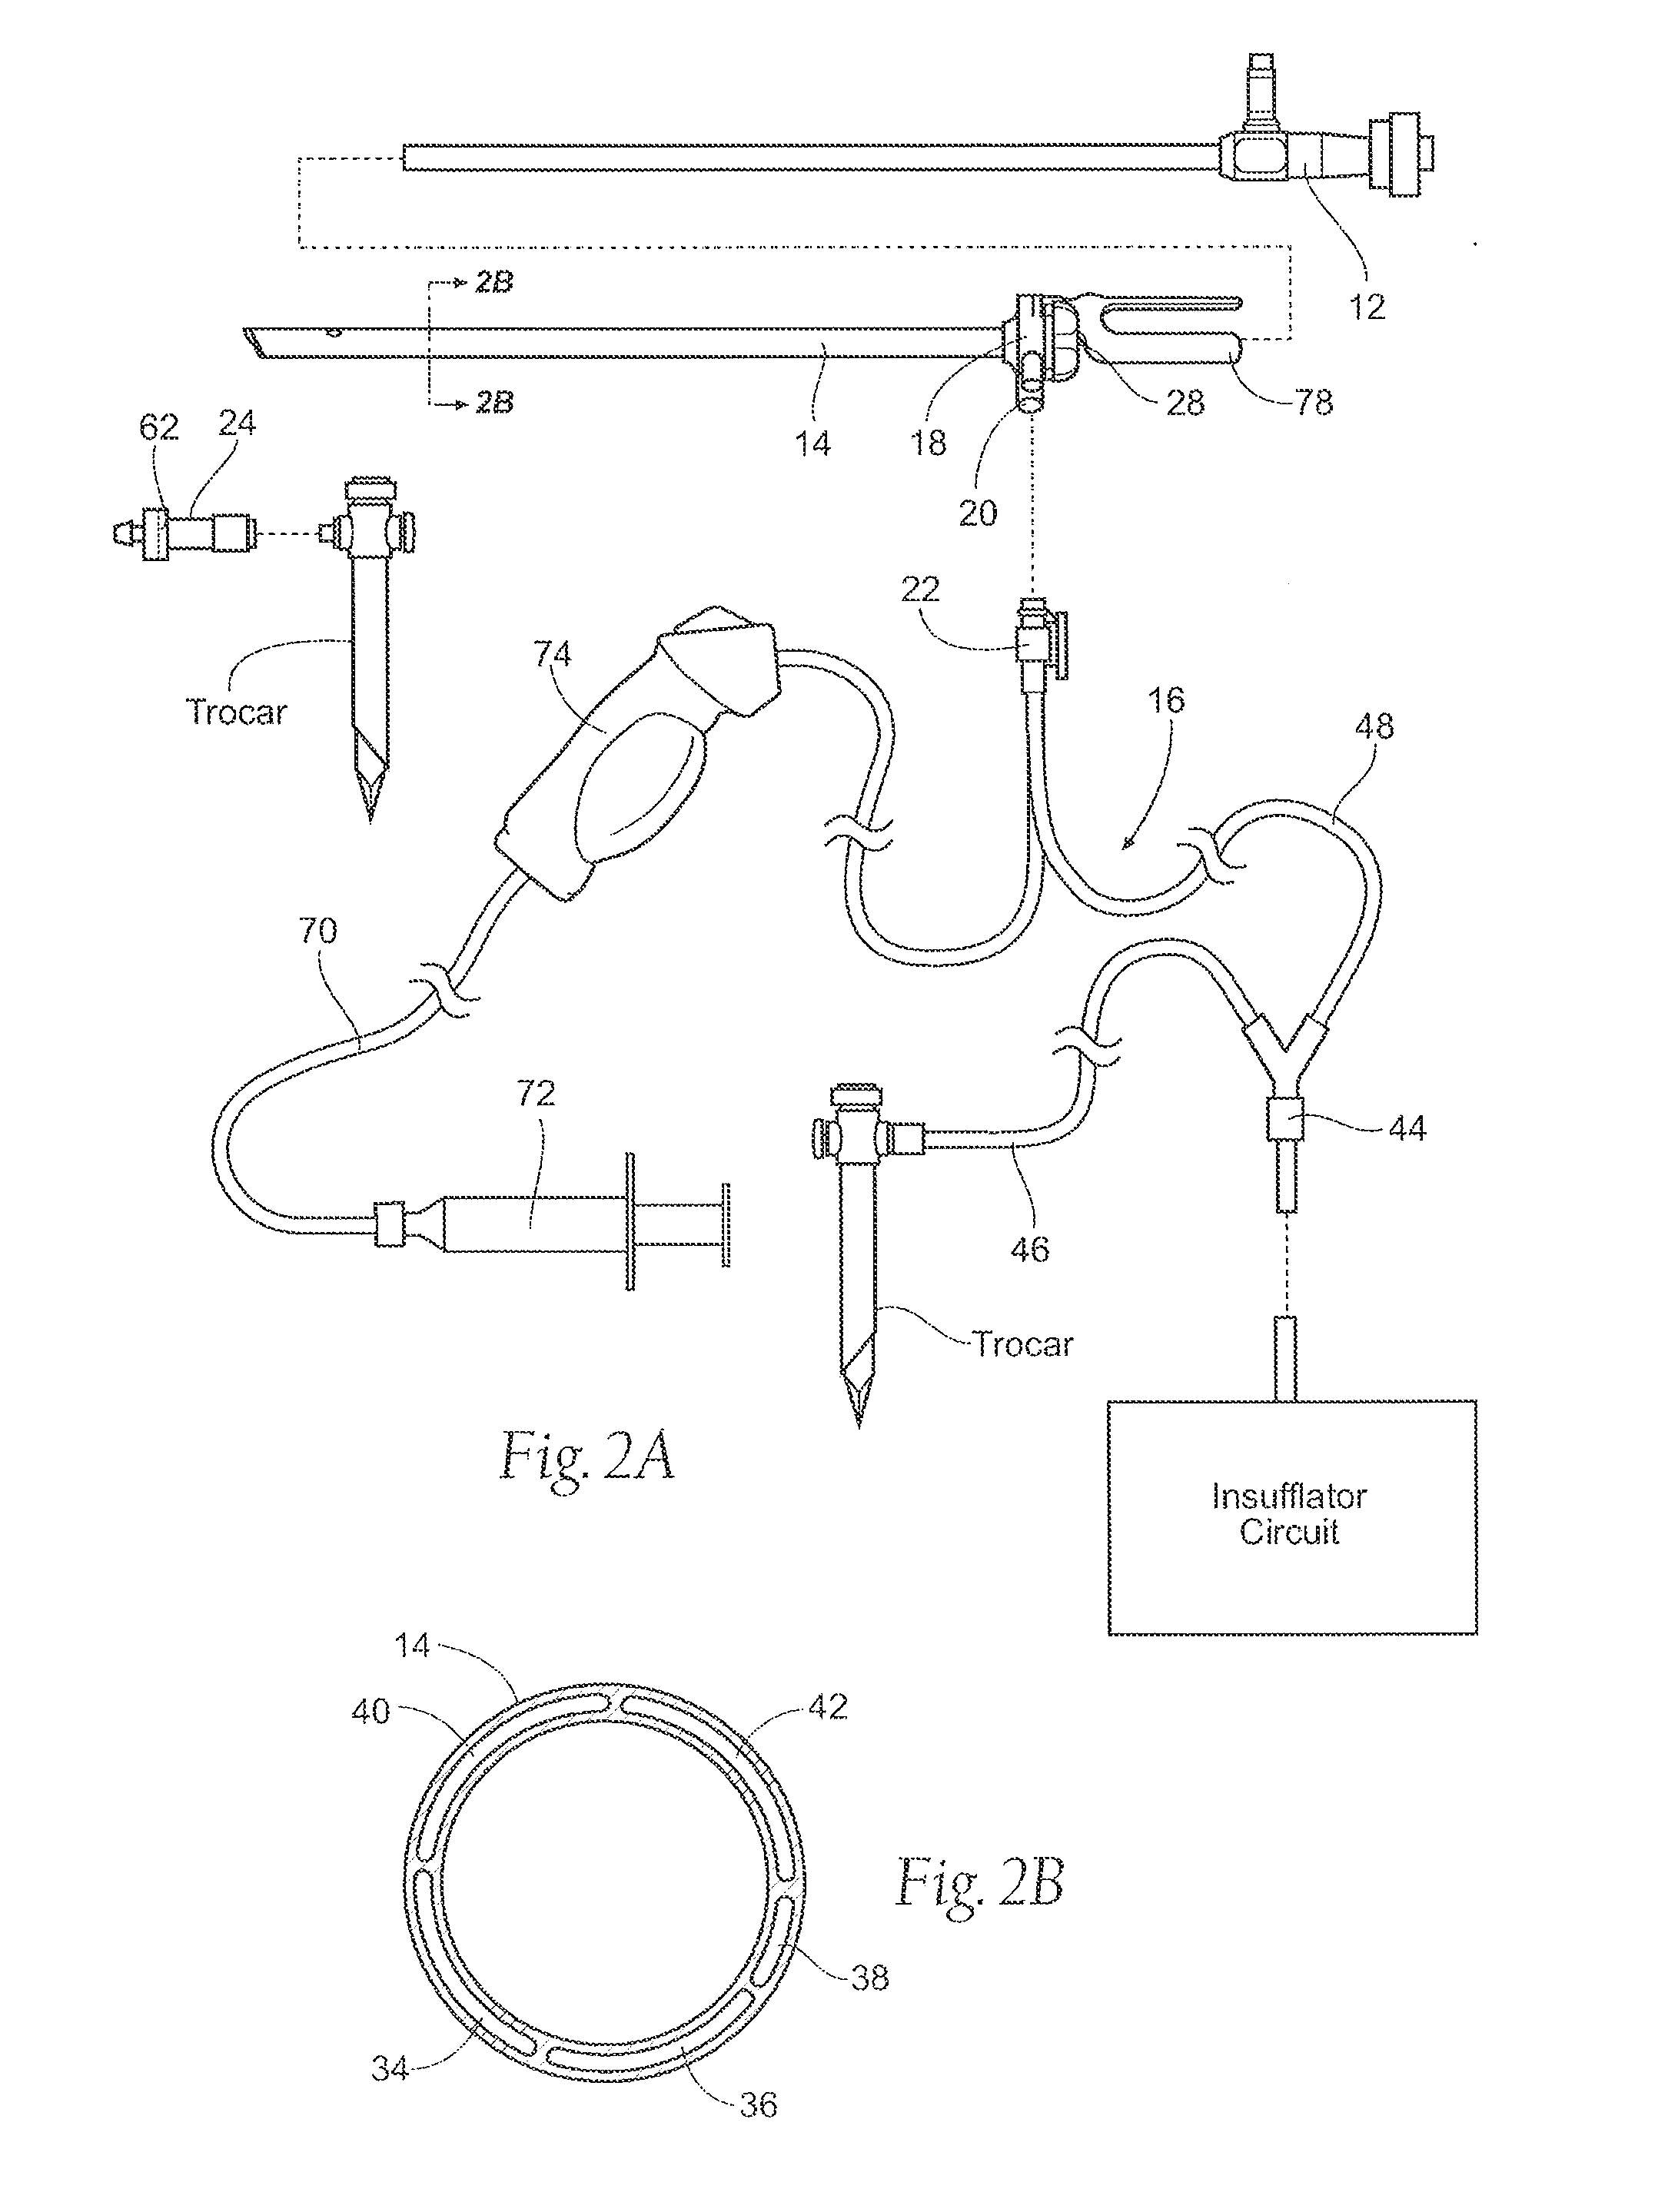 Systems and methods for optimizing and maintaining visualization of a surgical field during the use of surgical scopes